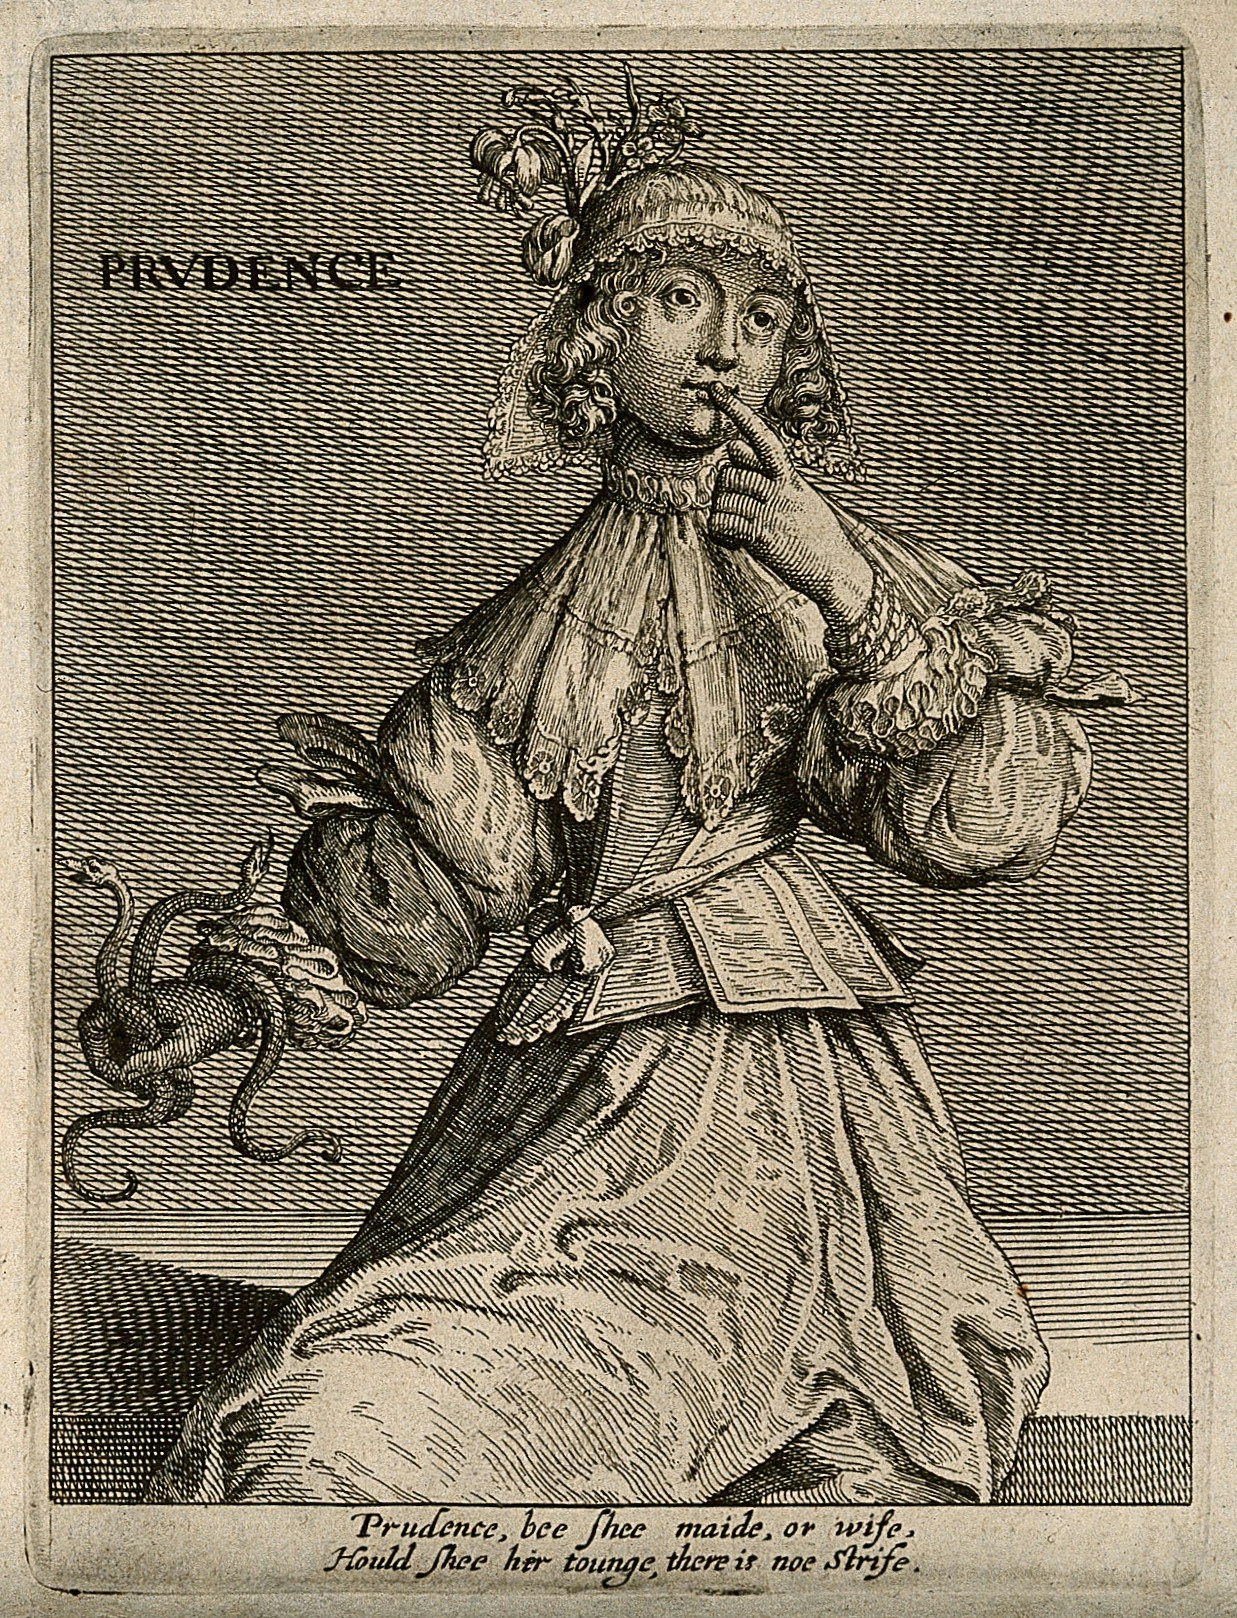 Black and white illustration of a woman holding snakes in one hand and holding the other hand to her lips.